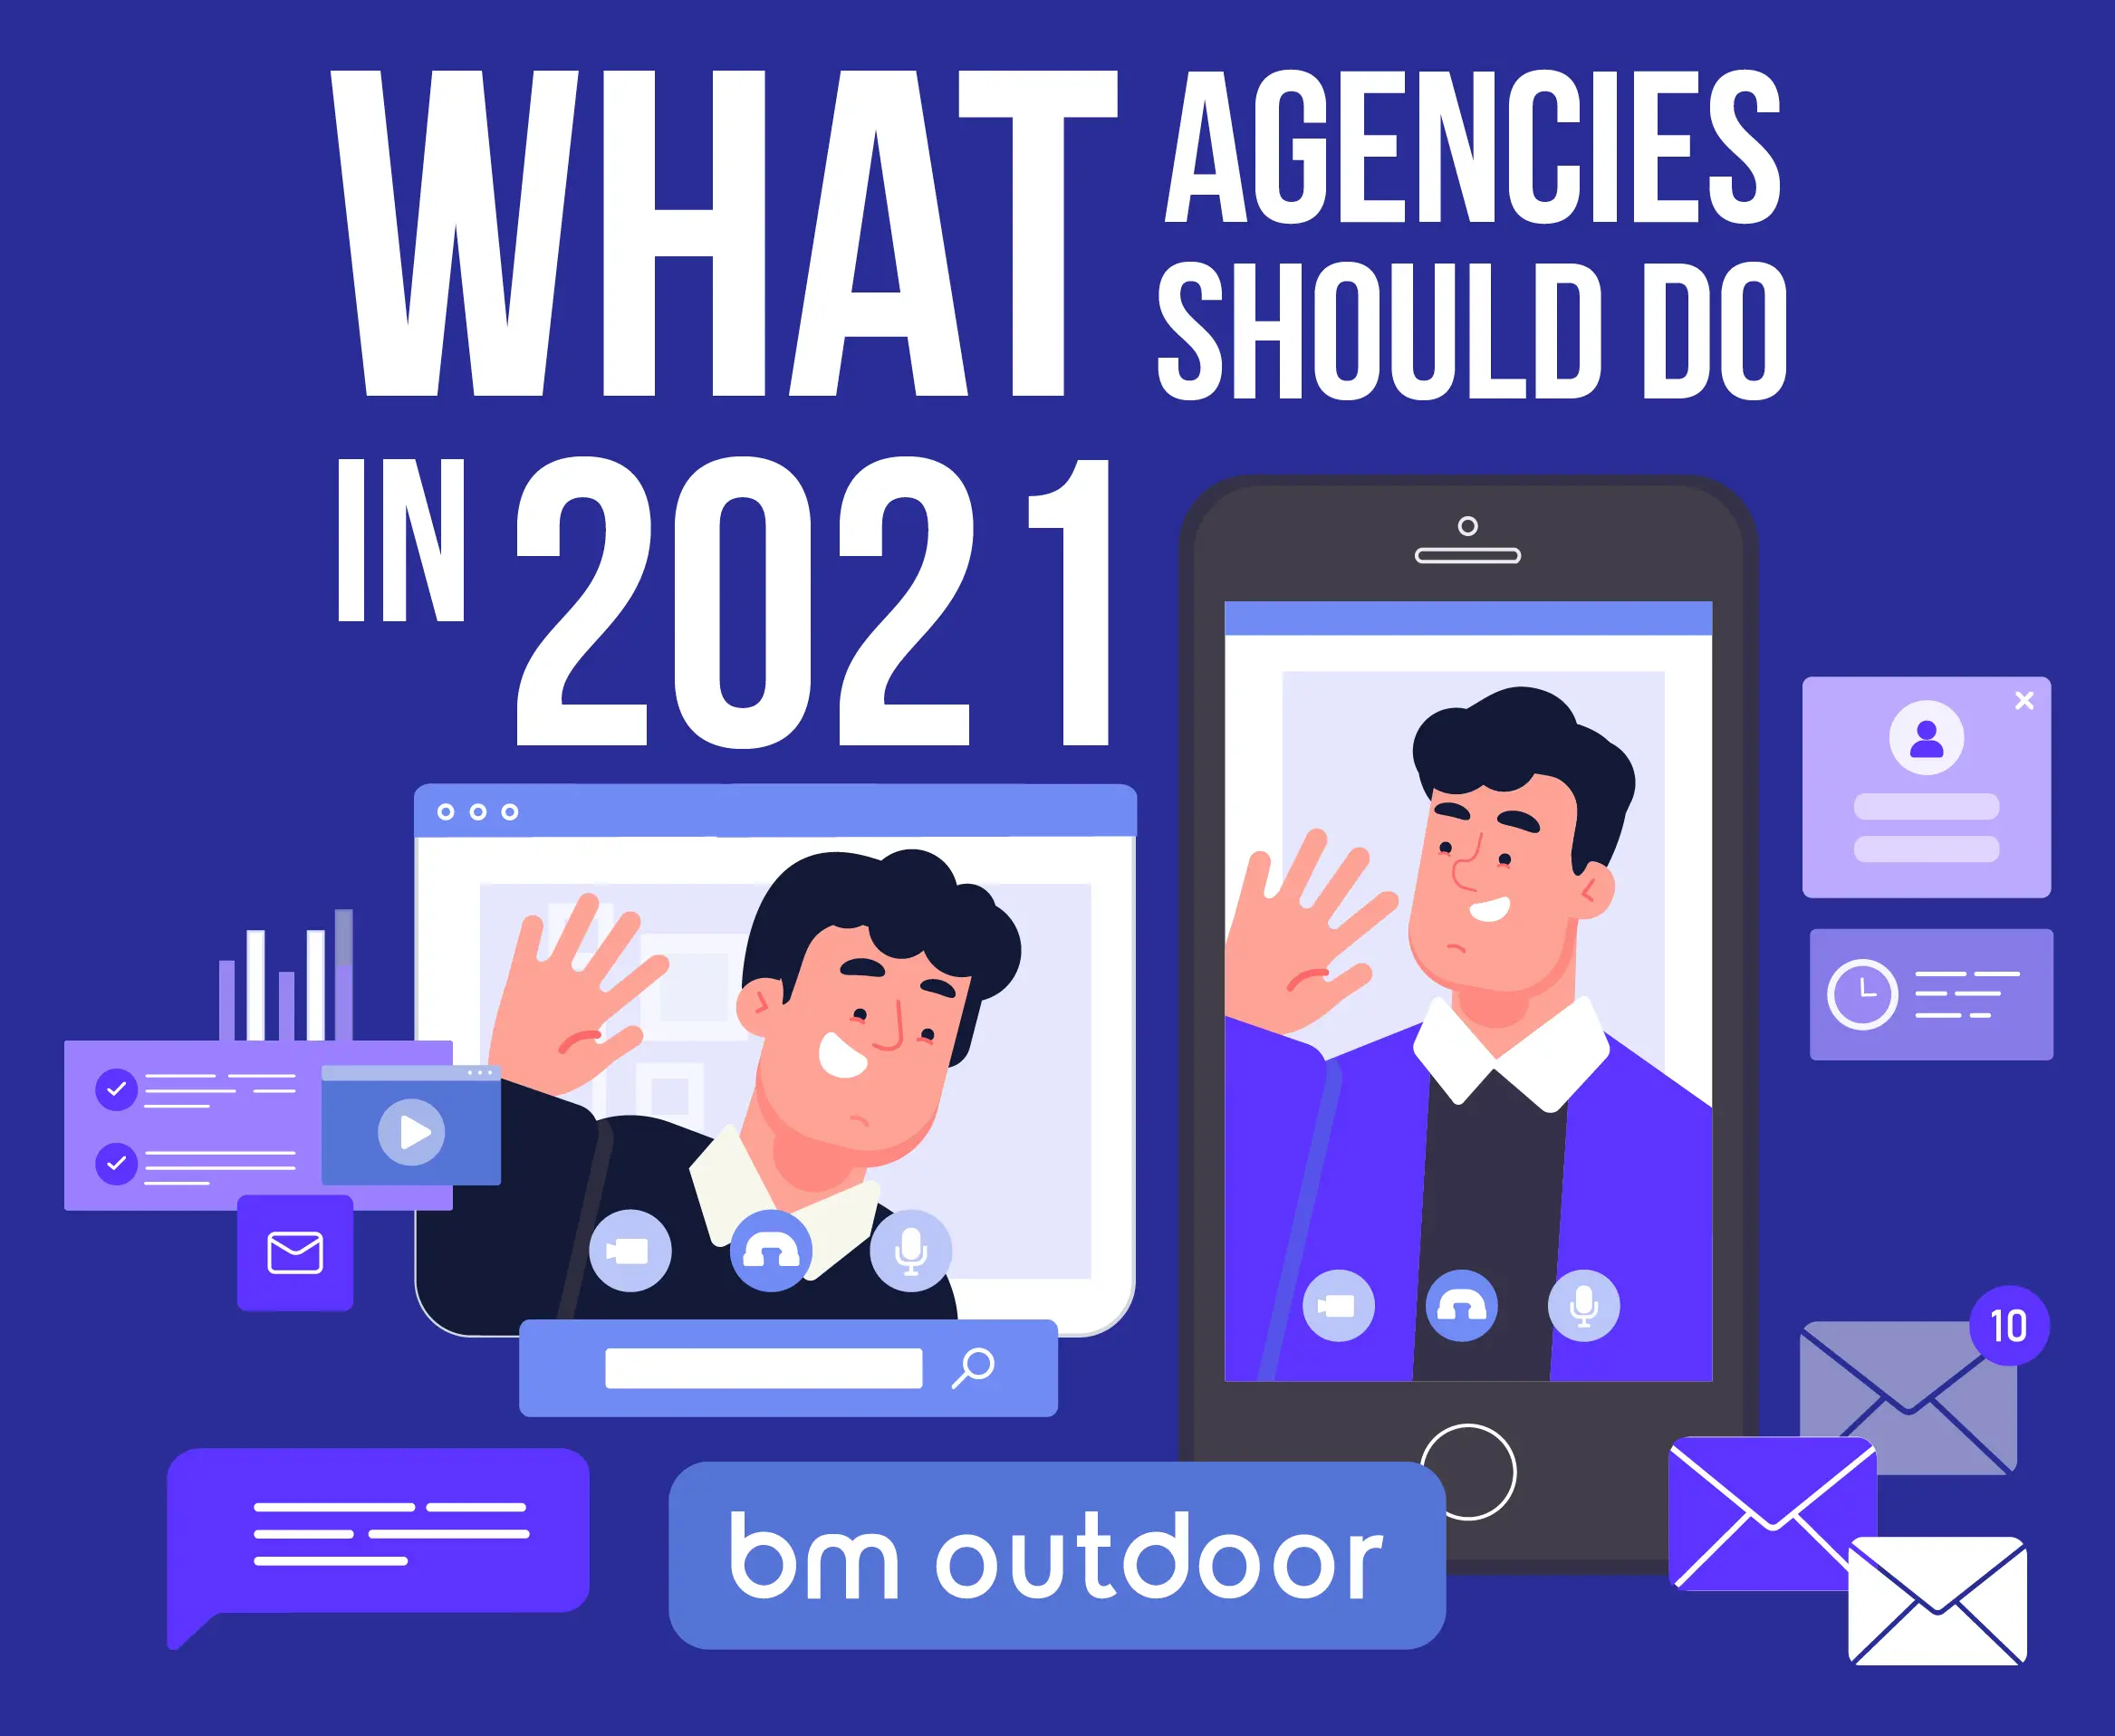 WHAT AGENCIES SHOULD DO IN 2021